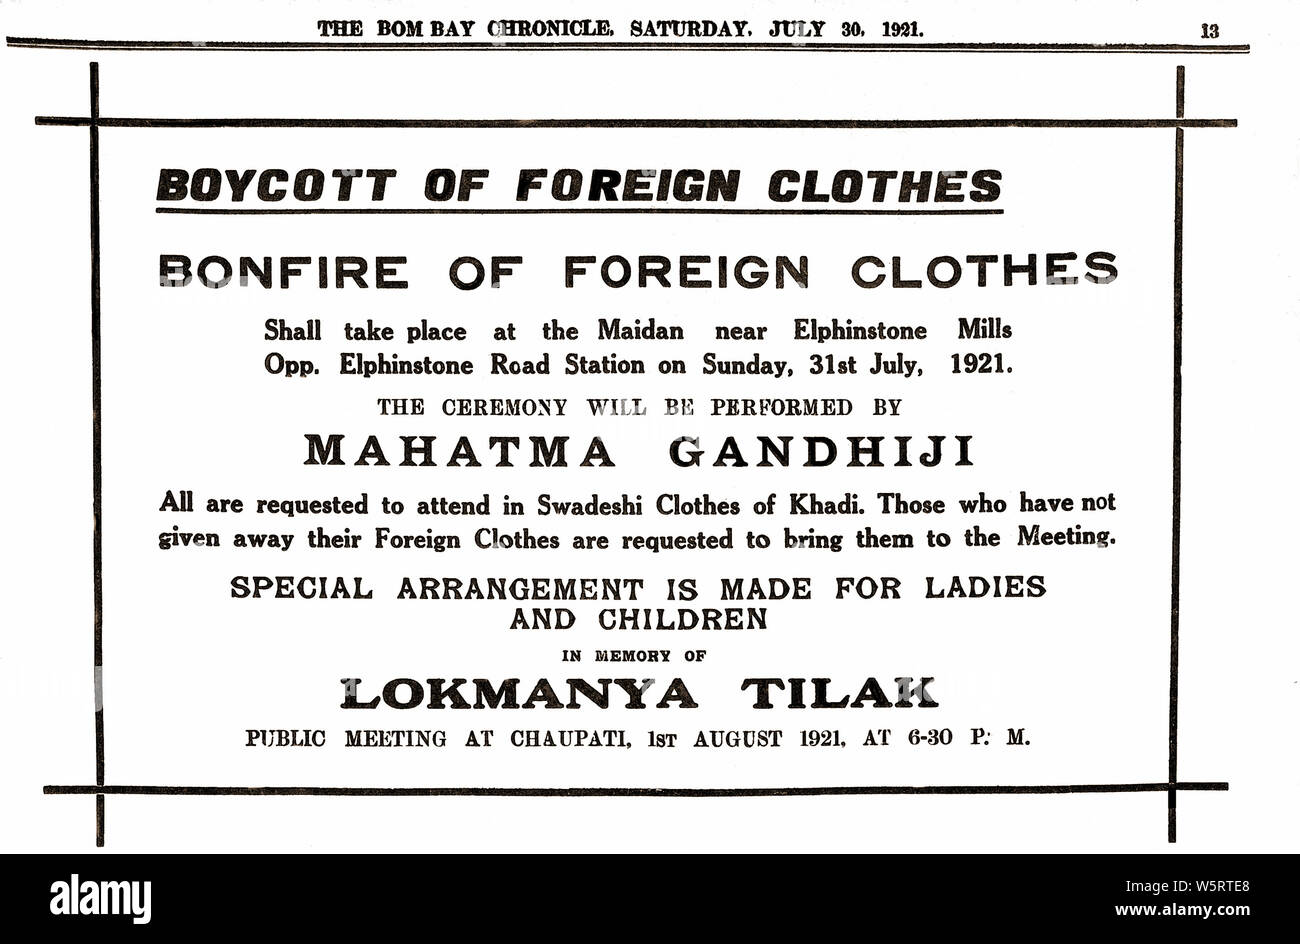 Appeal by Mahatma Gandhi to Boycott Foreign Clothes India Asia July 30 1921 Stock Photo